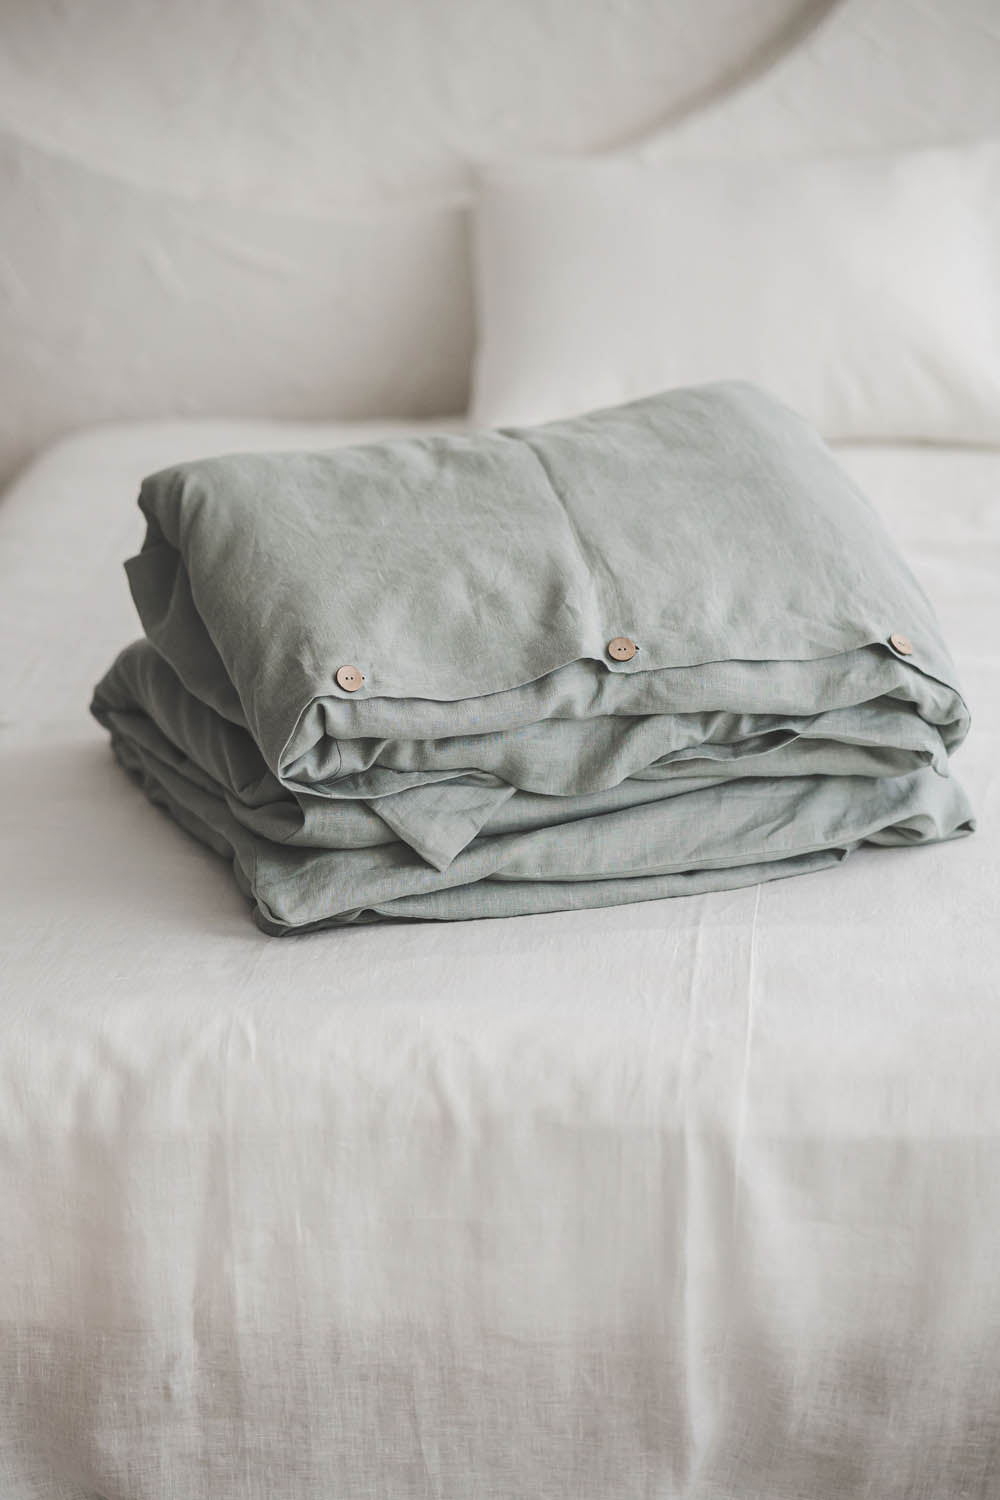 Frosty green linen duvet cover with buttons